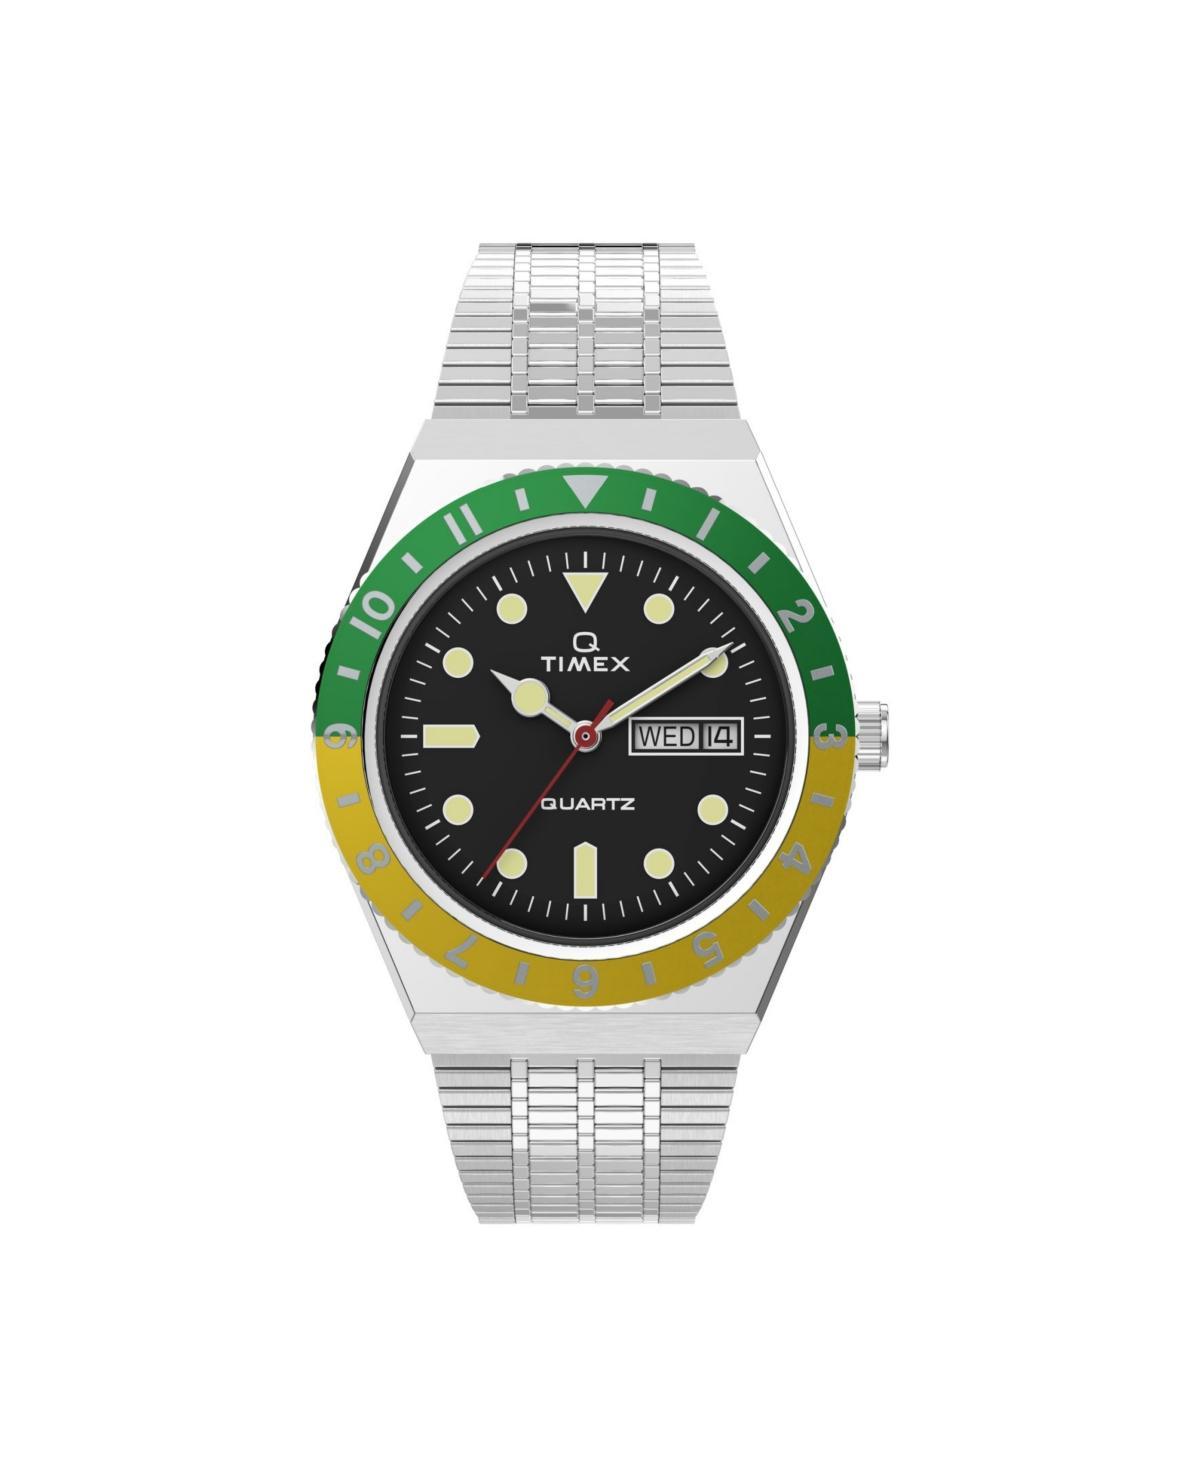 Timex Q Timex Reissue Bracelet Watch, 38mm Product Image